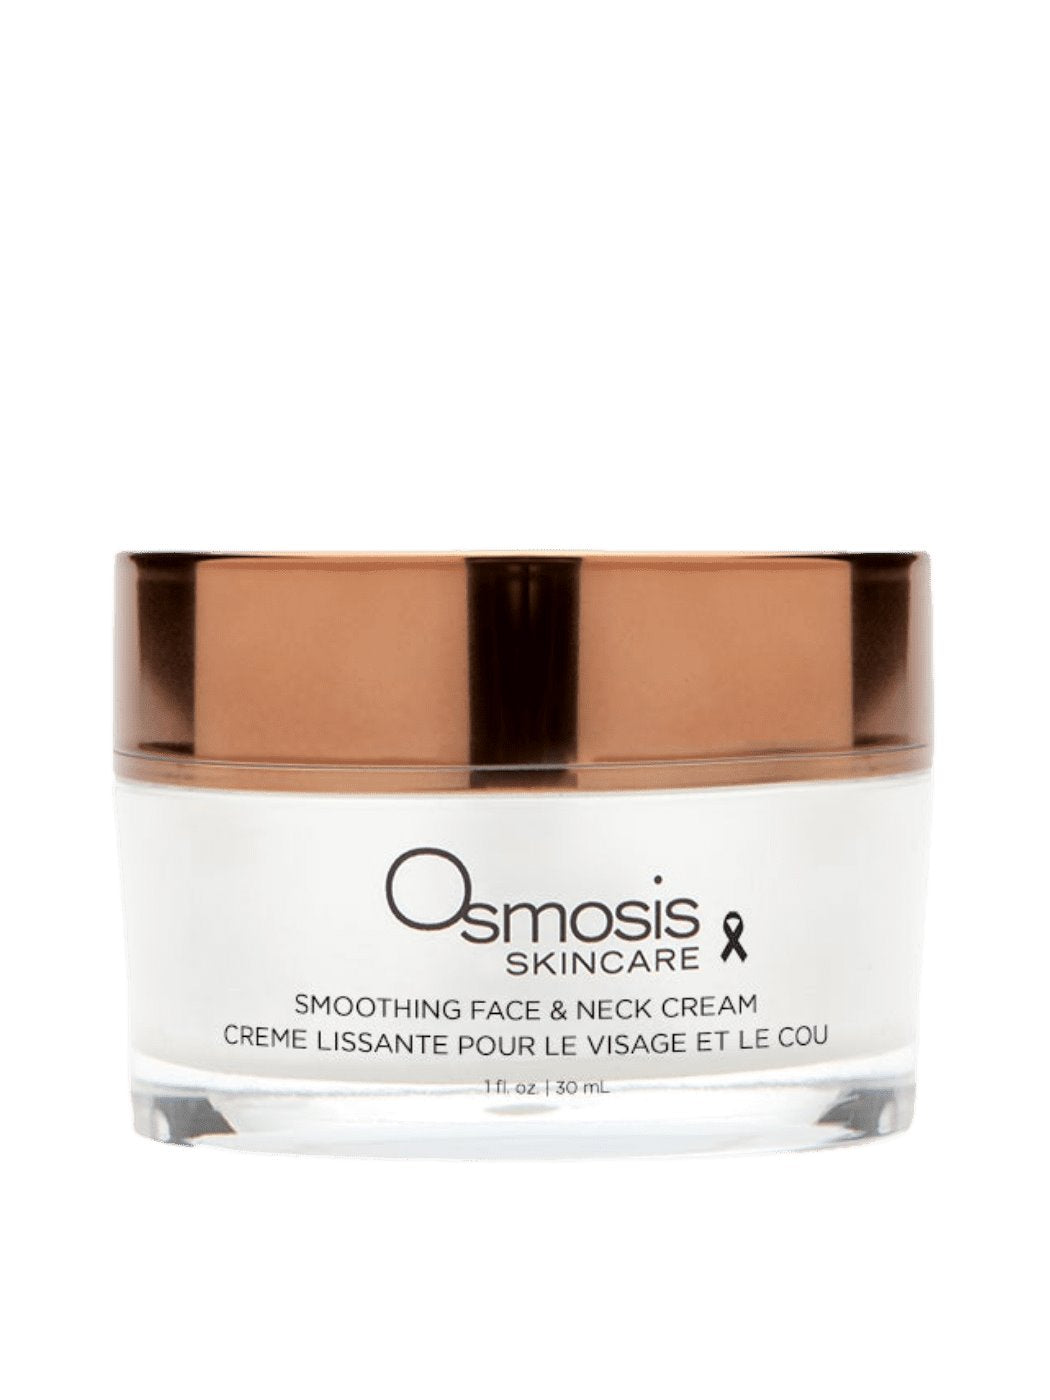 Osmosis Skincare Smoothing Face and Neck Cream Osmosis Beauty 1 fl. oz. Shop Skin Type Solutions